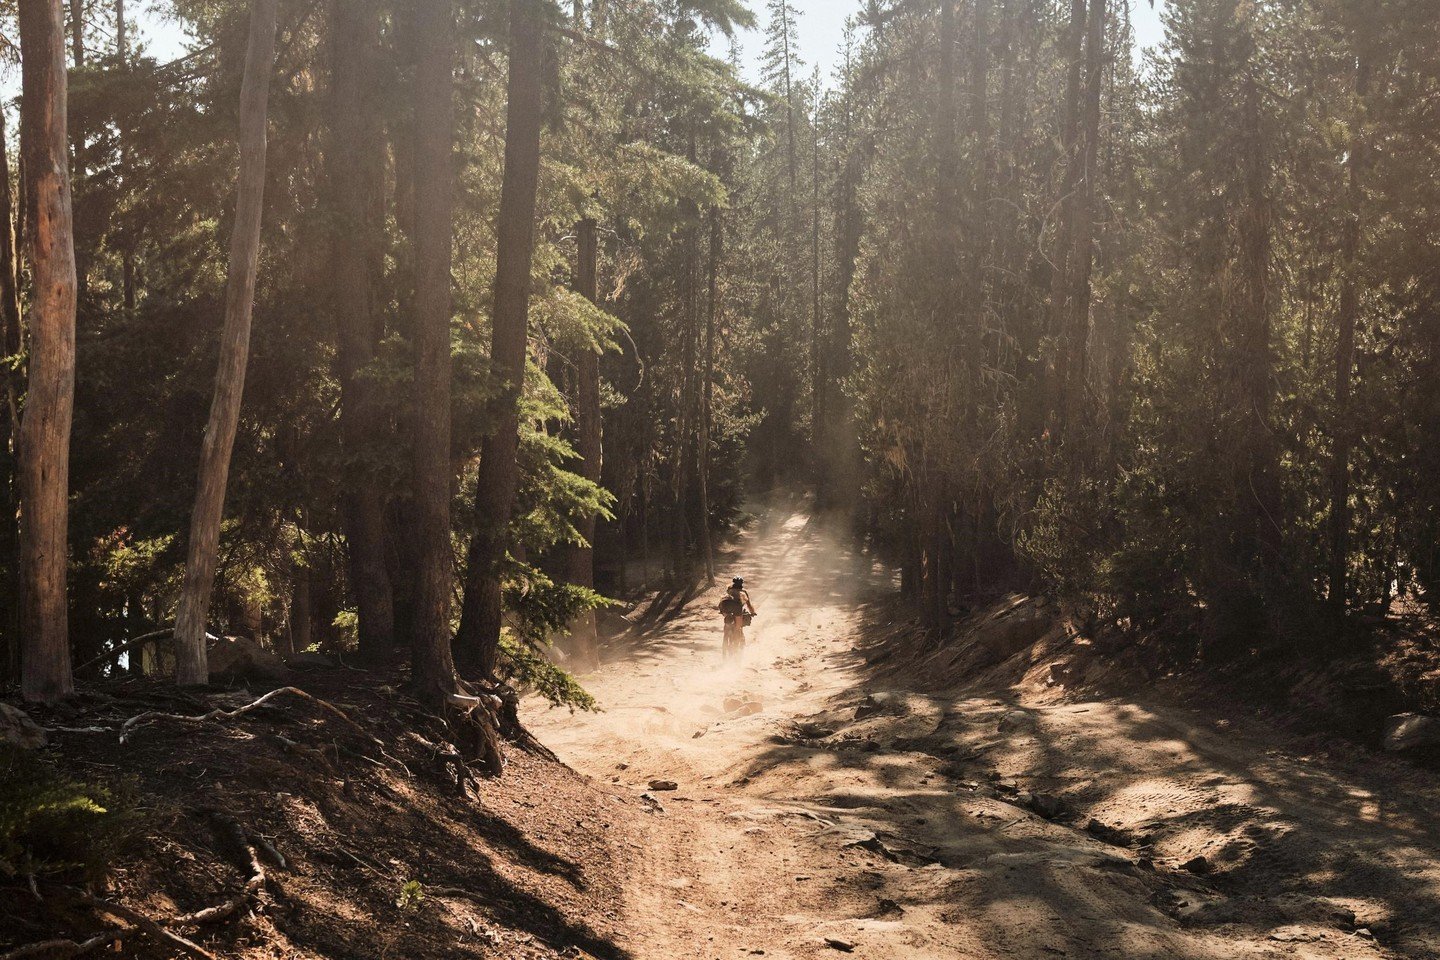 Riding the trail portions of the OTT takes some grit and a level of comfort riding all kinds of single-track trails. For those with a similar sense of adventure but who want to avoid the technical and more remote trails, we've mapped a gravel version